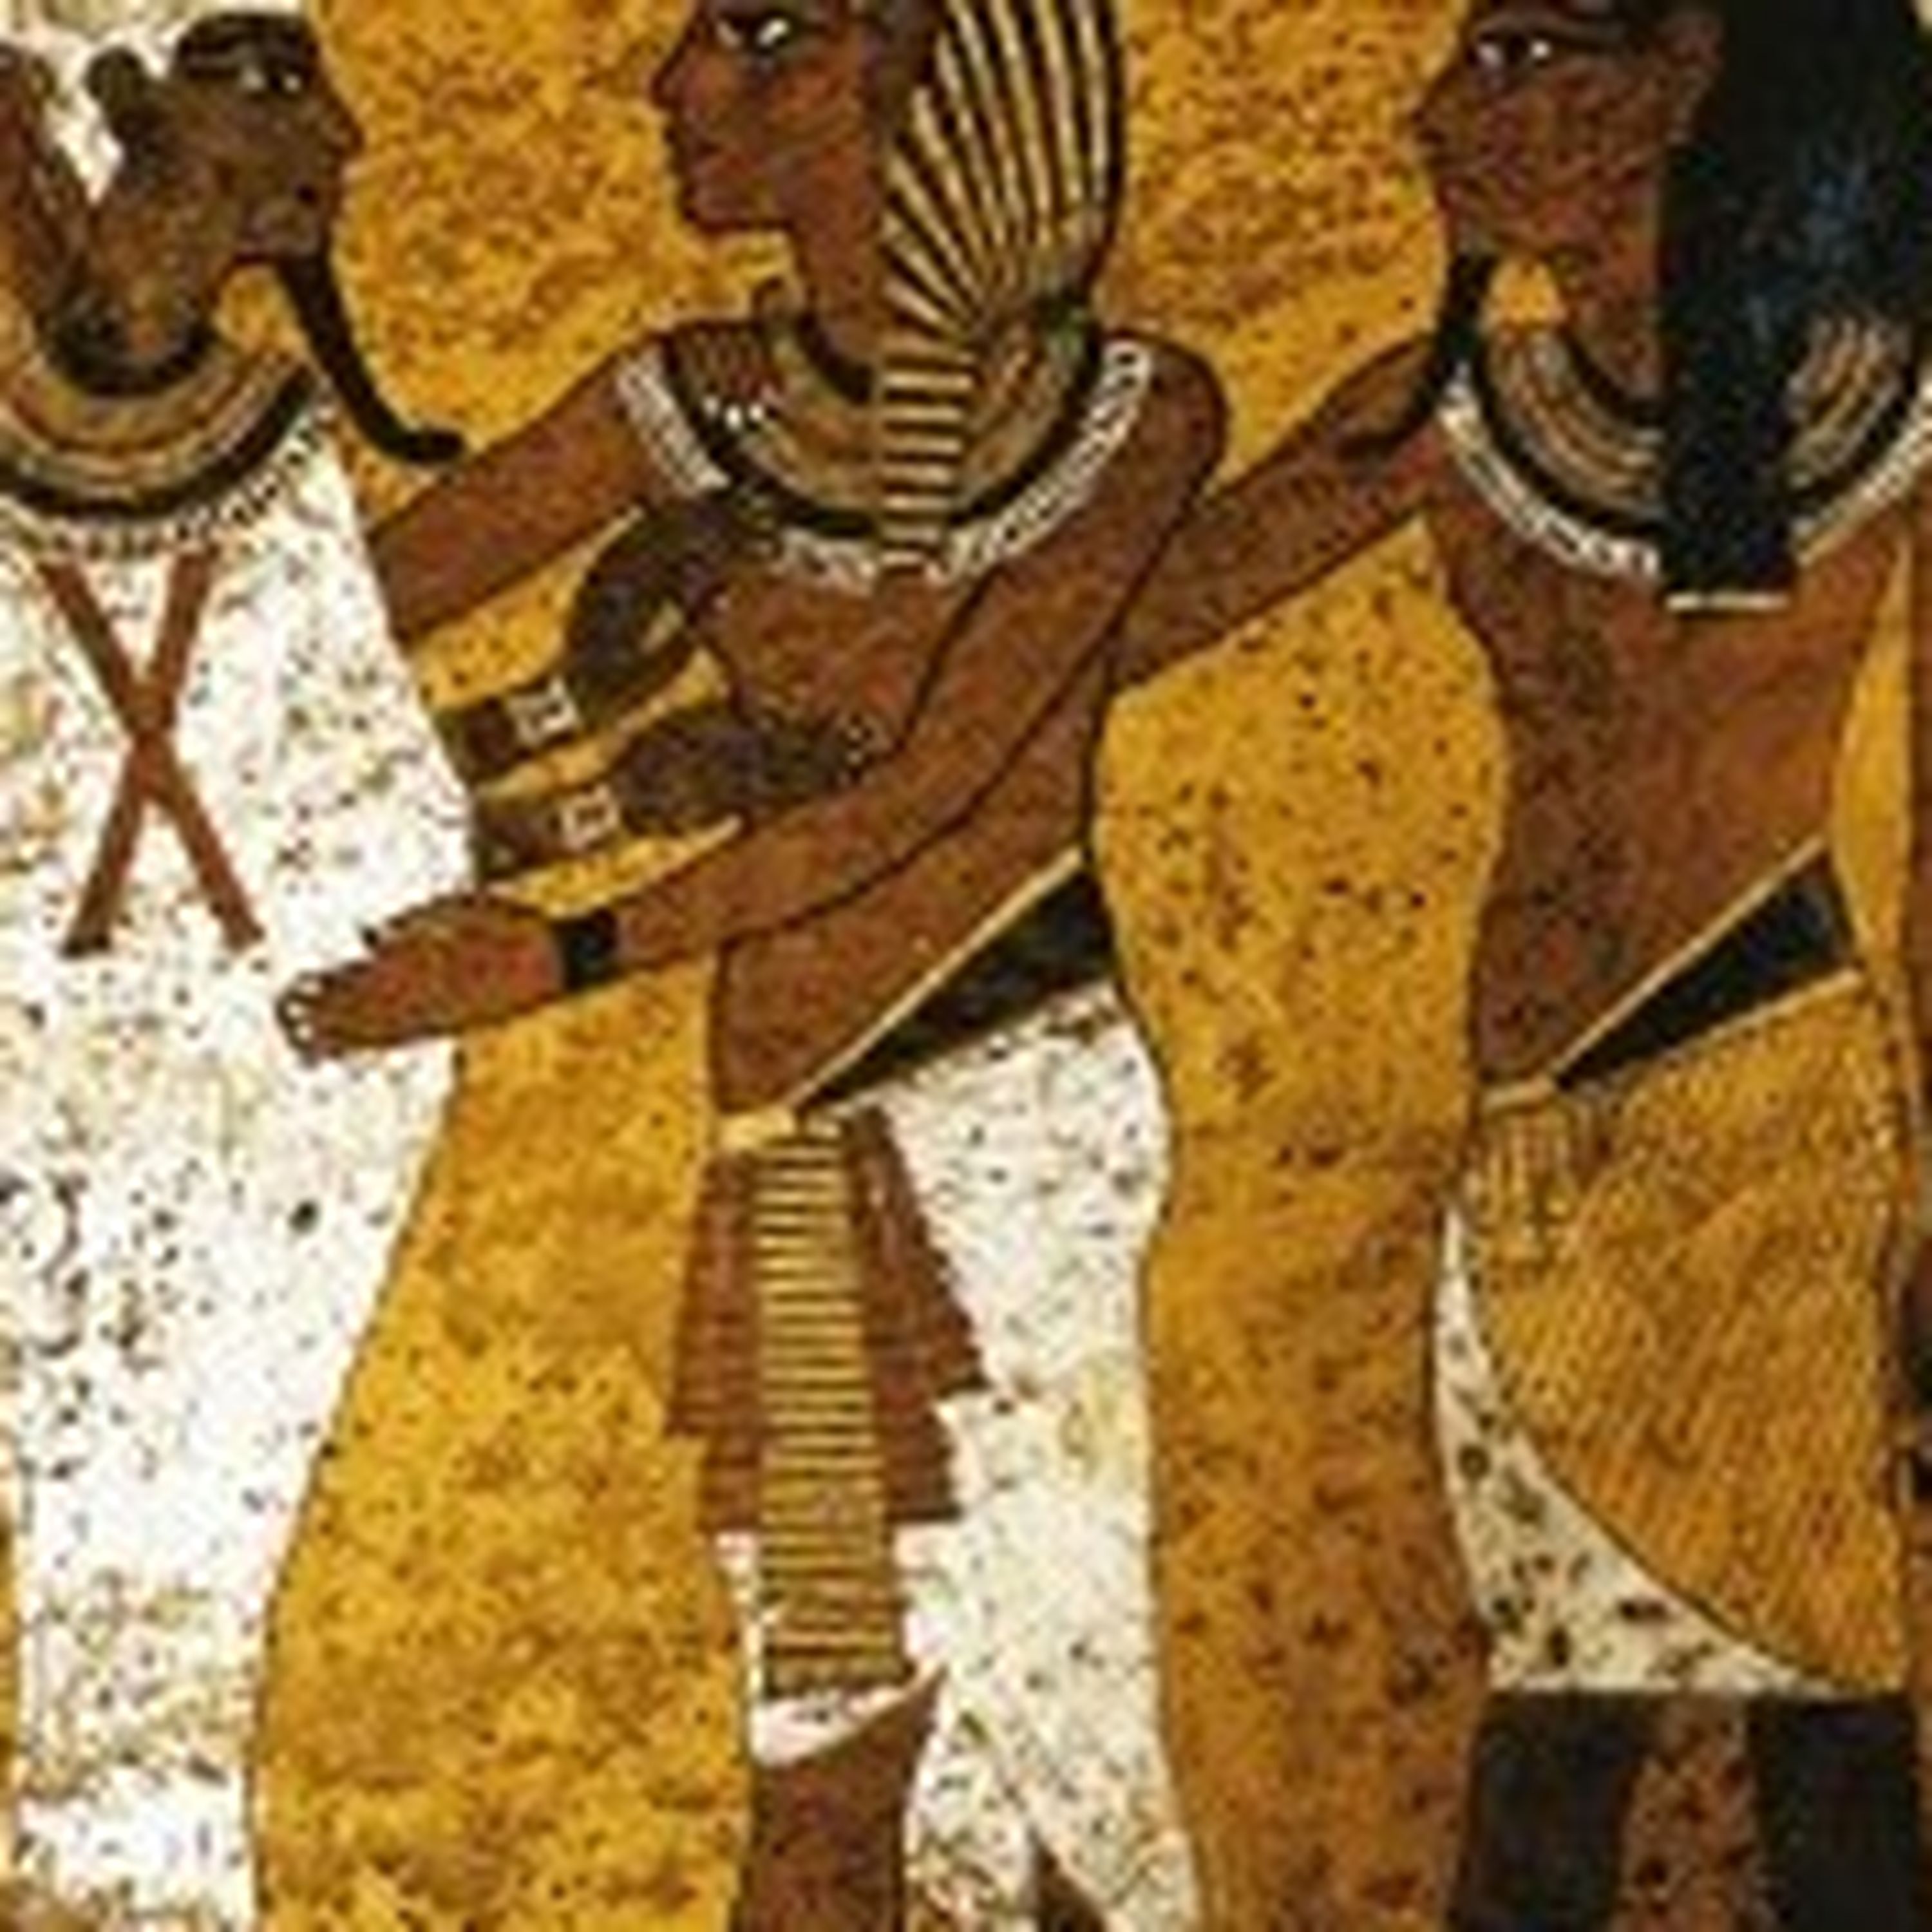 Episode35: The Pharao’s Staff